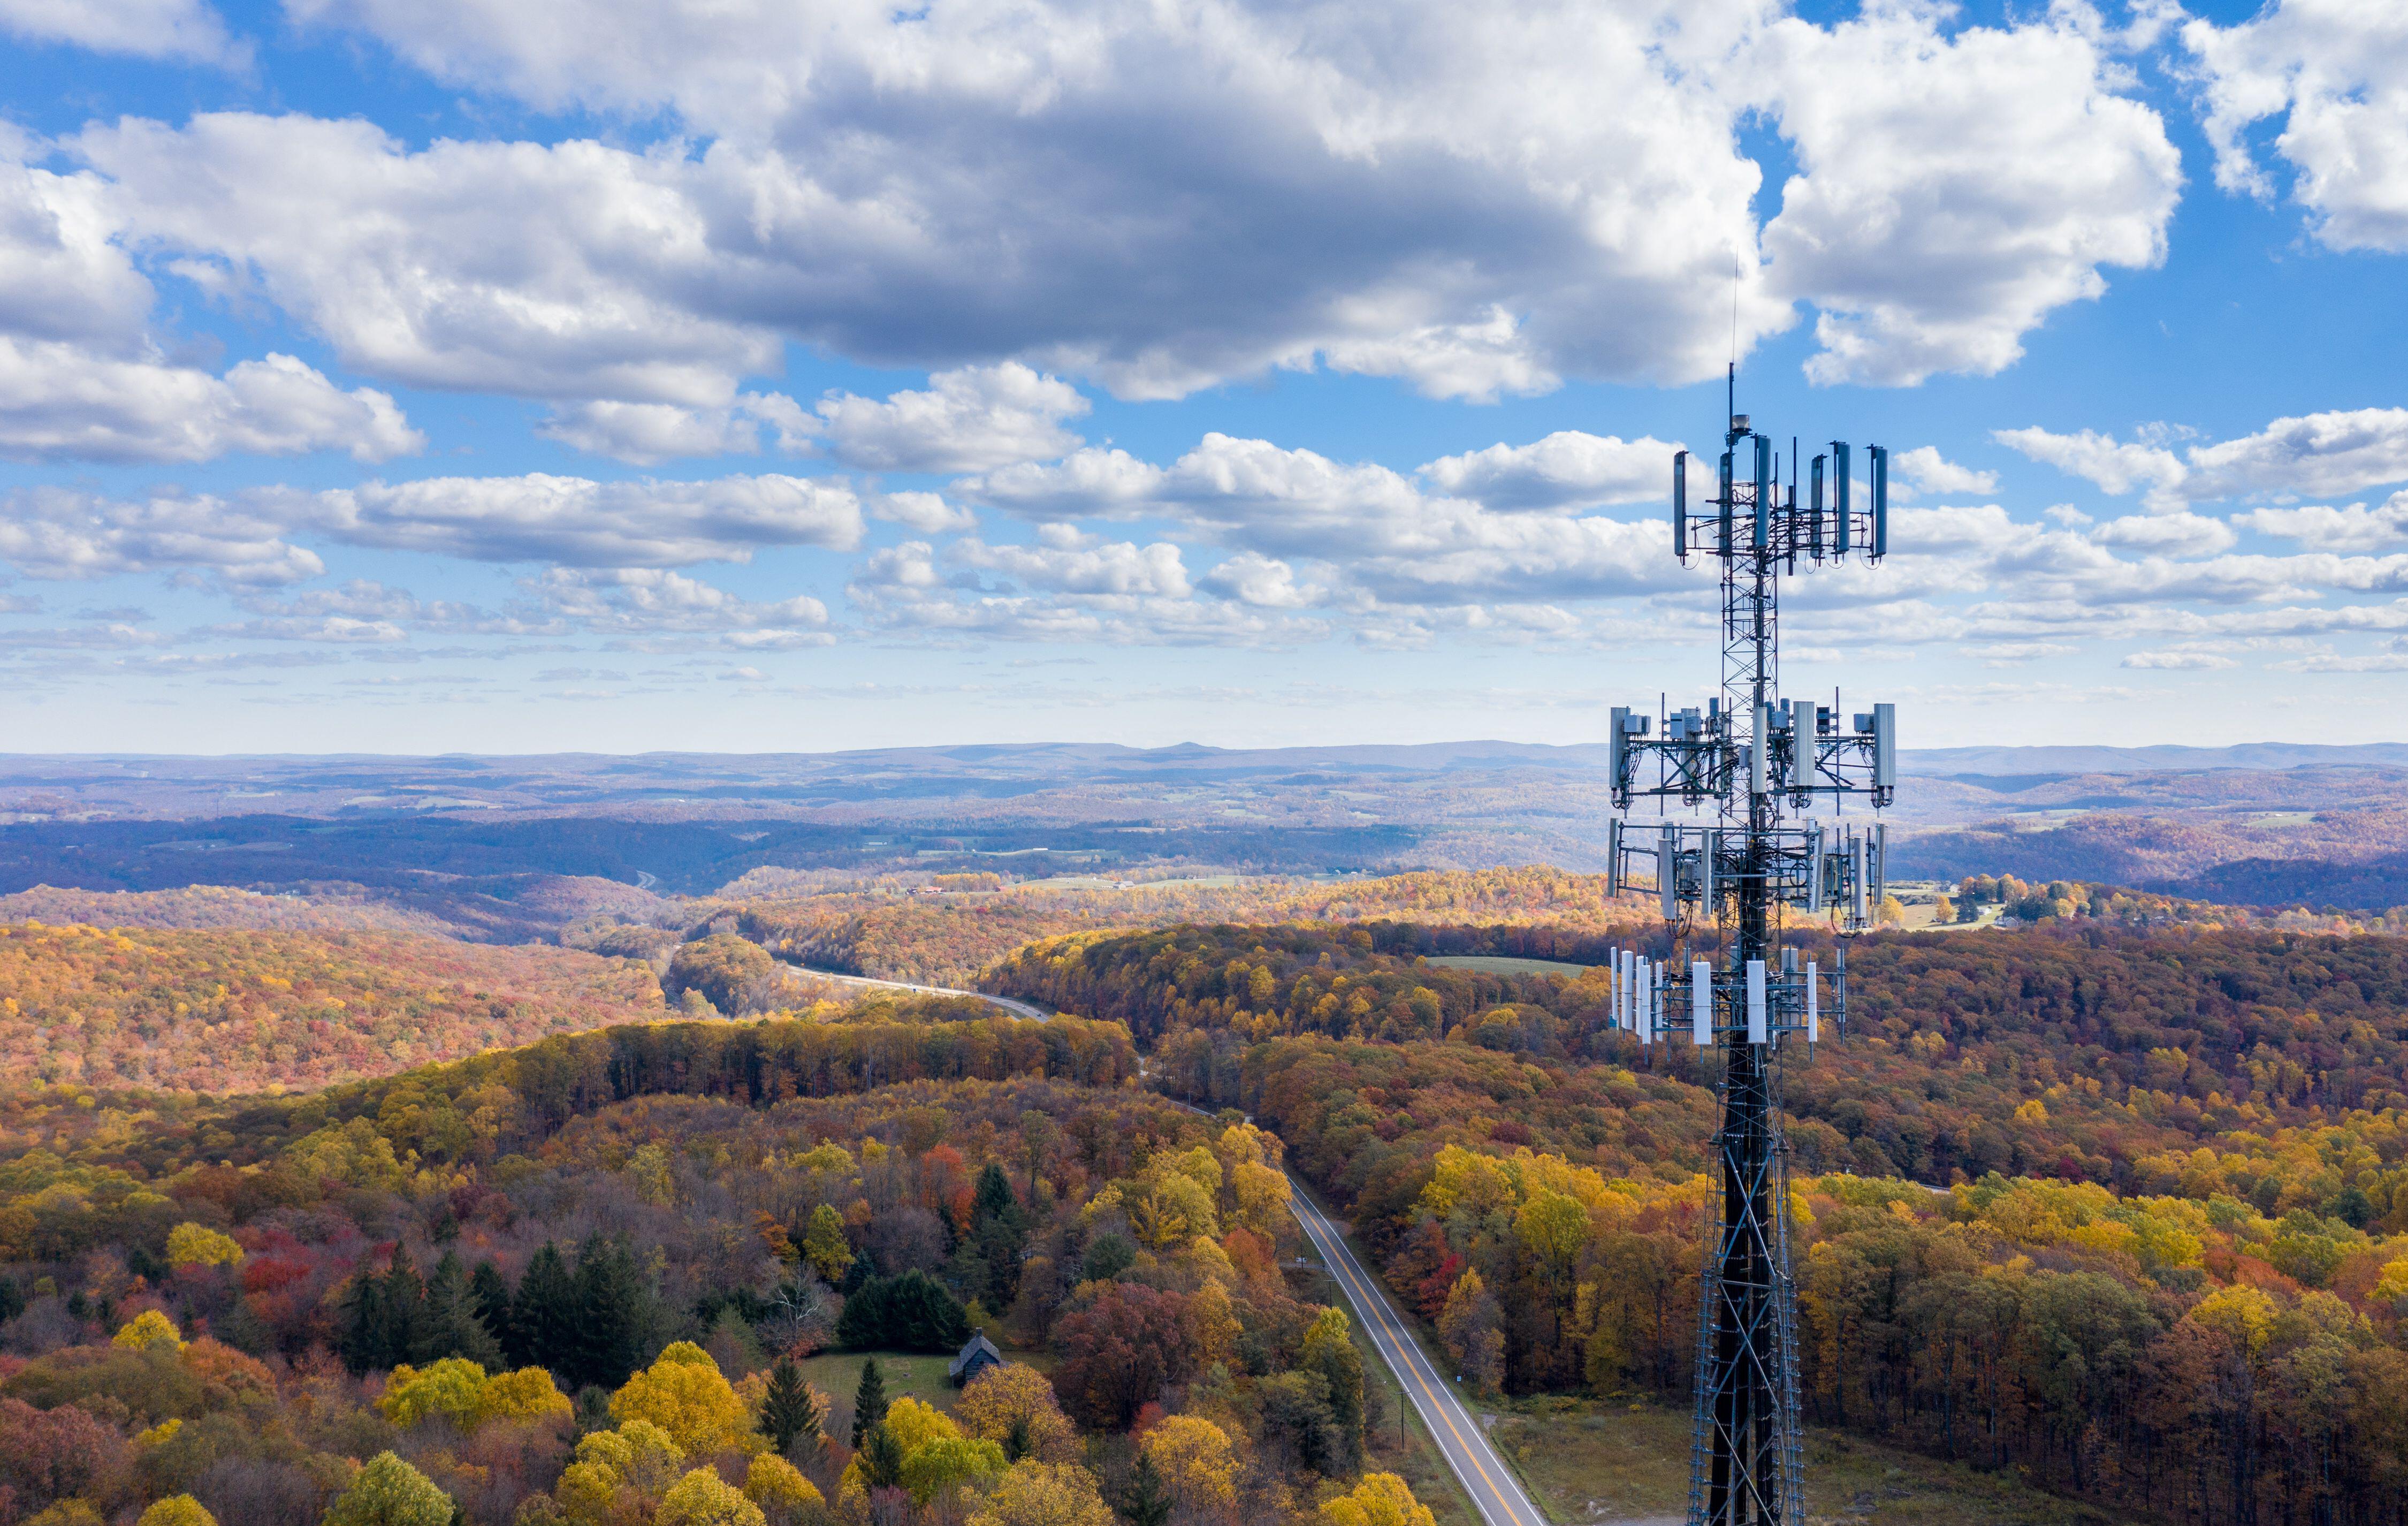 A cell phone tower amid the trees.